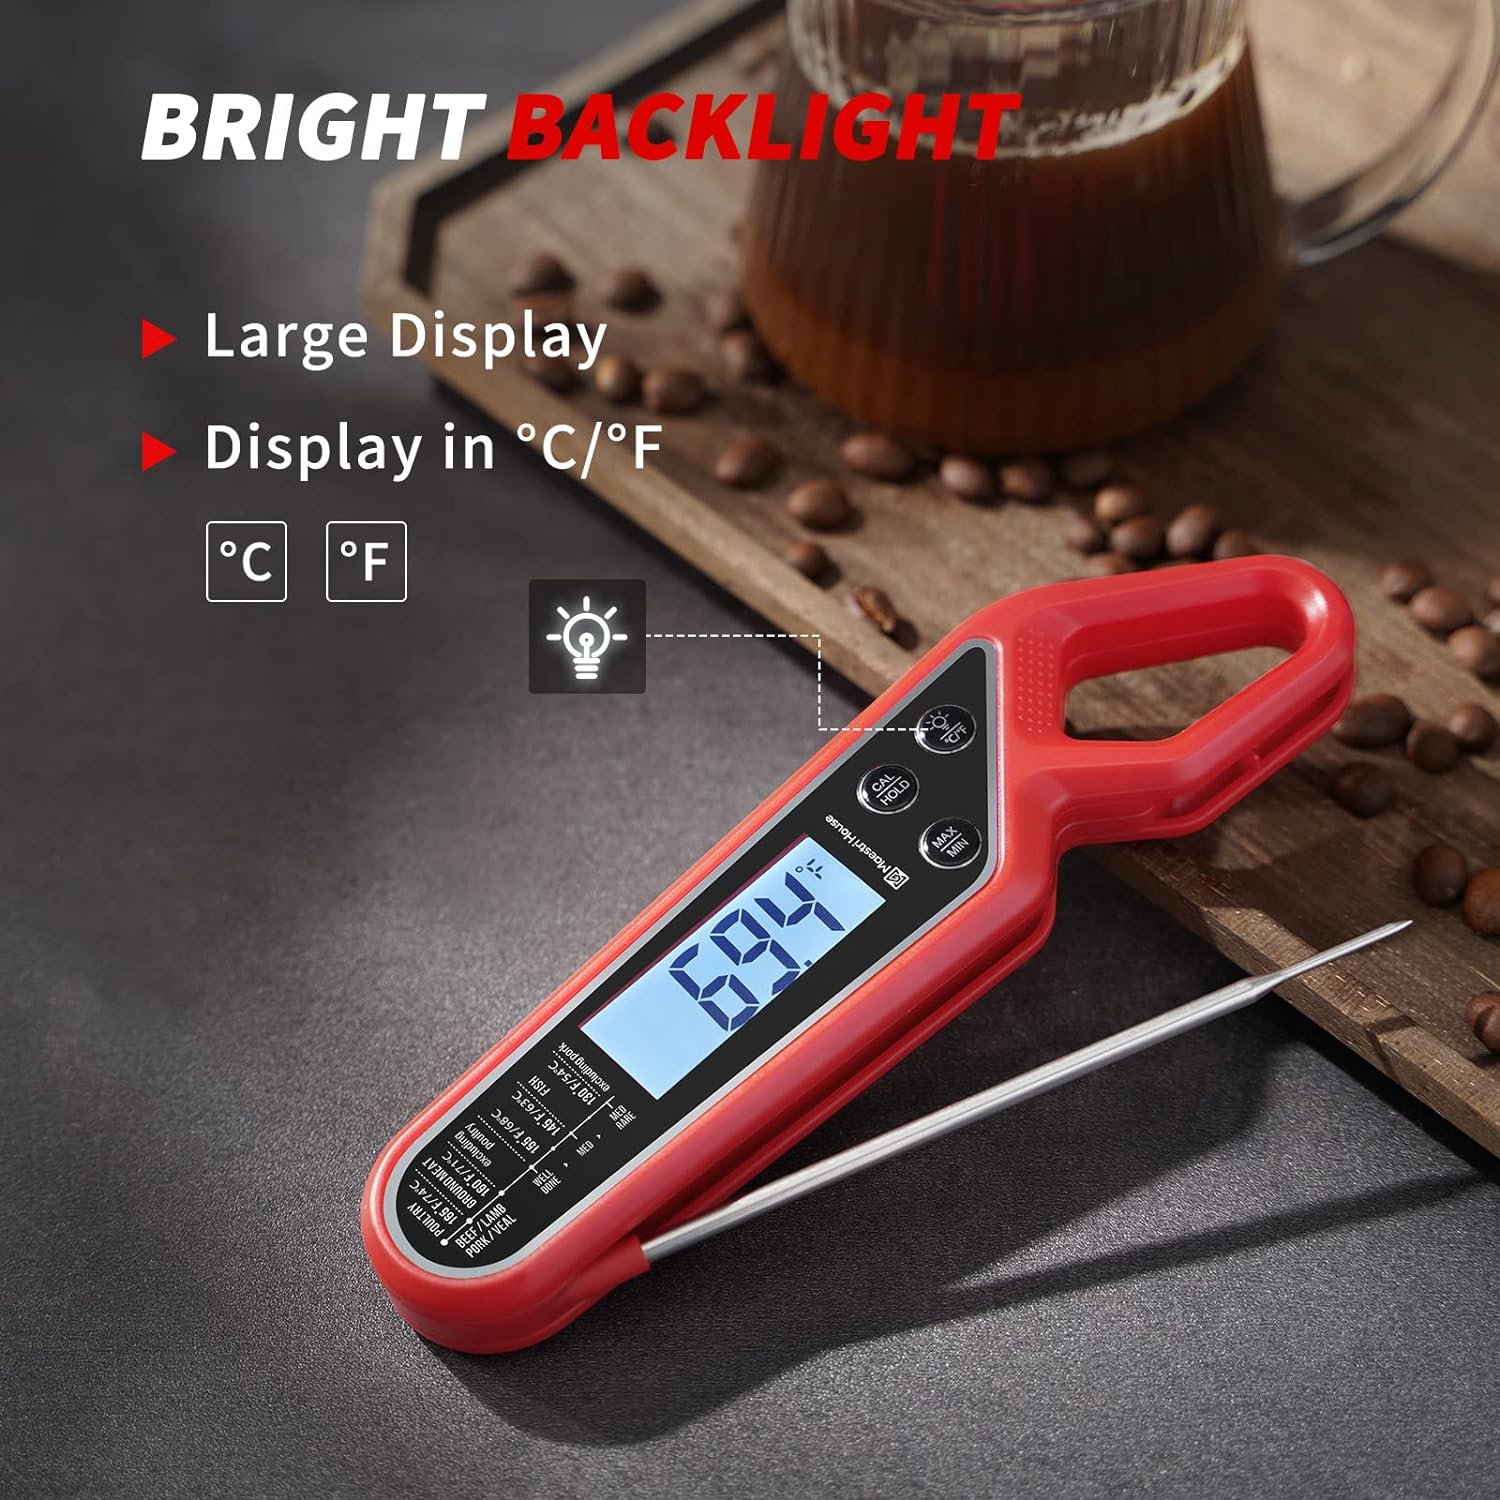 Maestri House Instant Read Meat Thermometer for Cooking, Digital Waterproof Food Thermometer with Backlight, Magnet, Calibration and Foldable Probe for Grill, Kitchen, Baking, BBQ, Candy (Red)